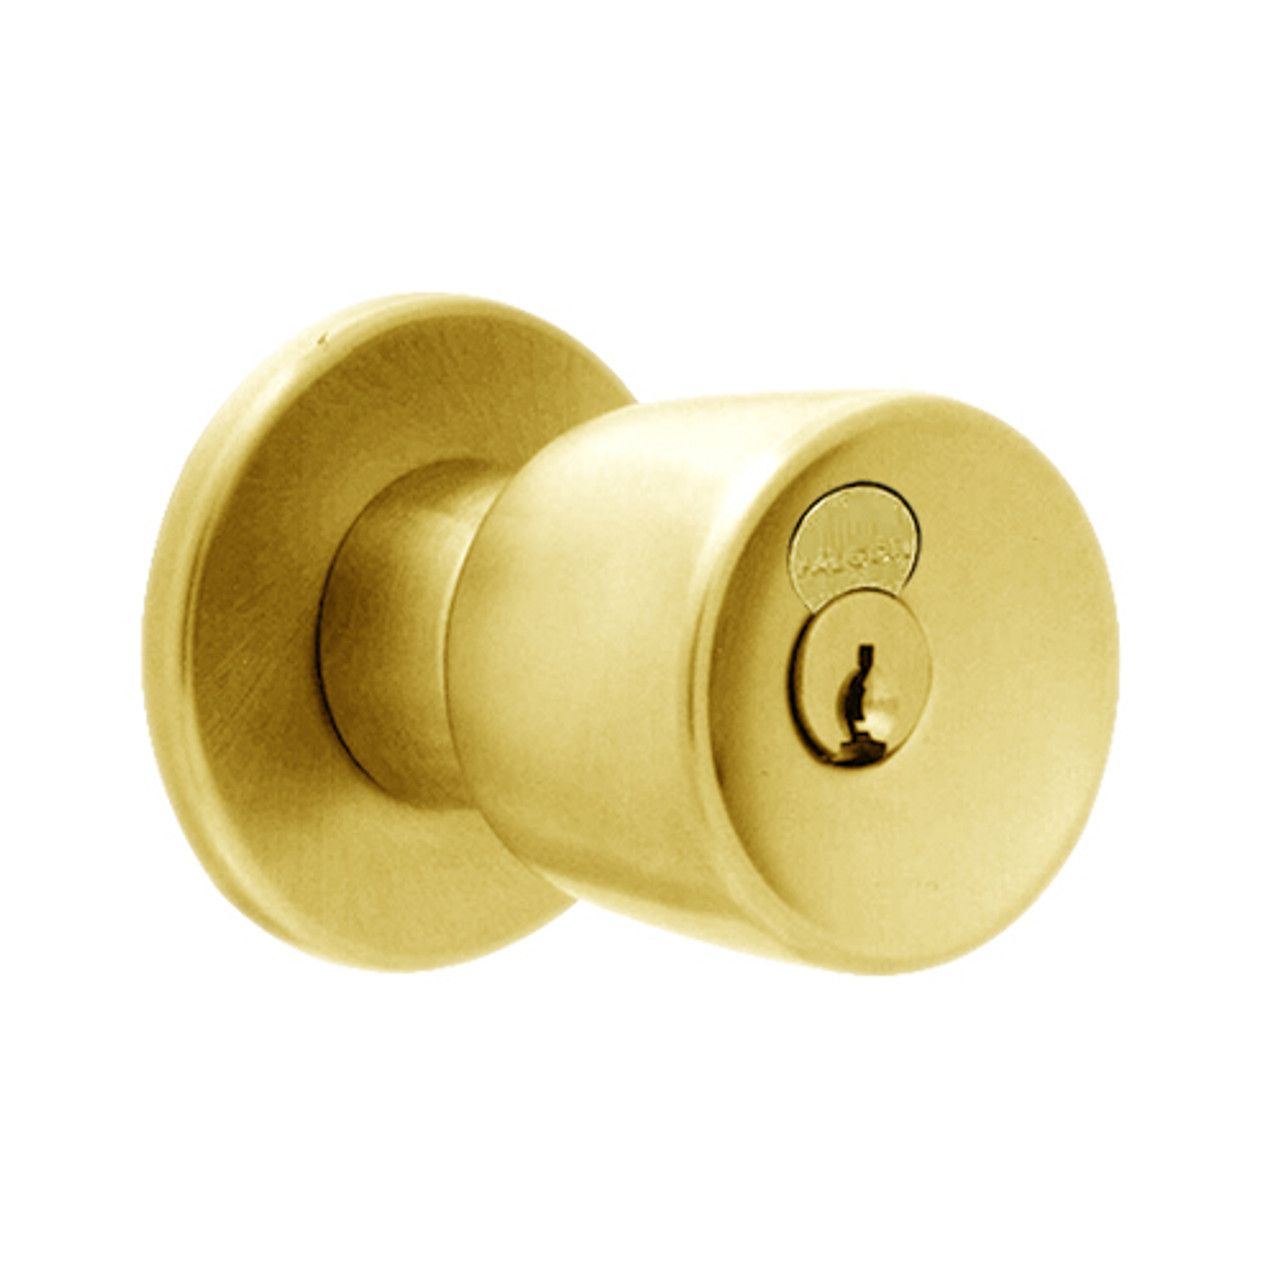 X571GD-EG-605 Falcon X Series Cylindrical Dormitory Lock with Elite-Gala Knob Style in Bright Brass Finish